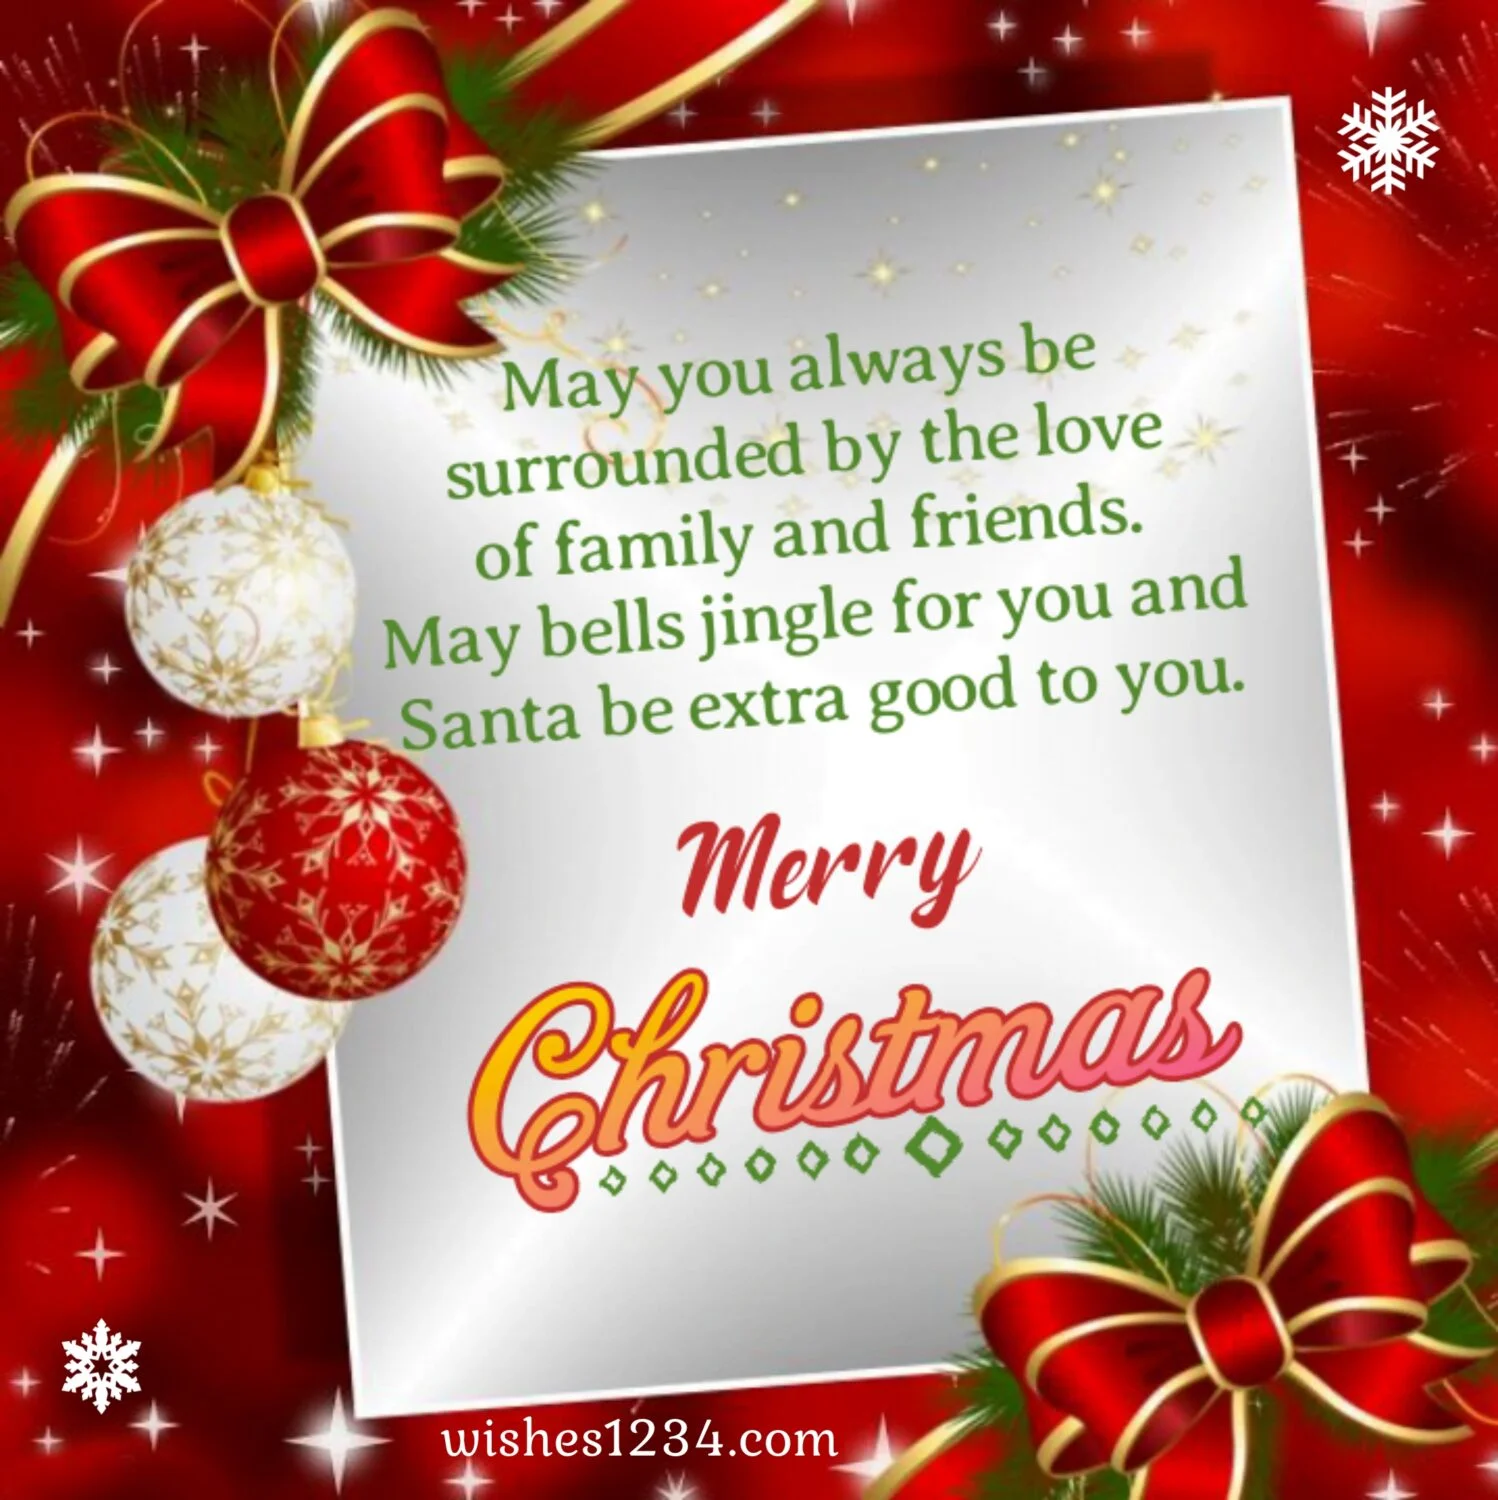 Christmas greetings with ribbon and balls, Merry Christmas Quotes & short wishes.